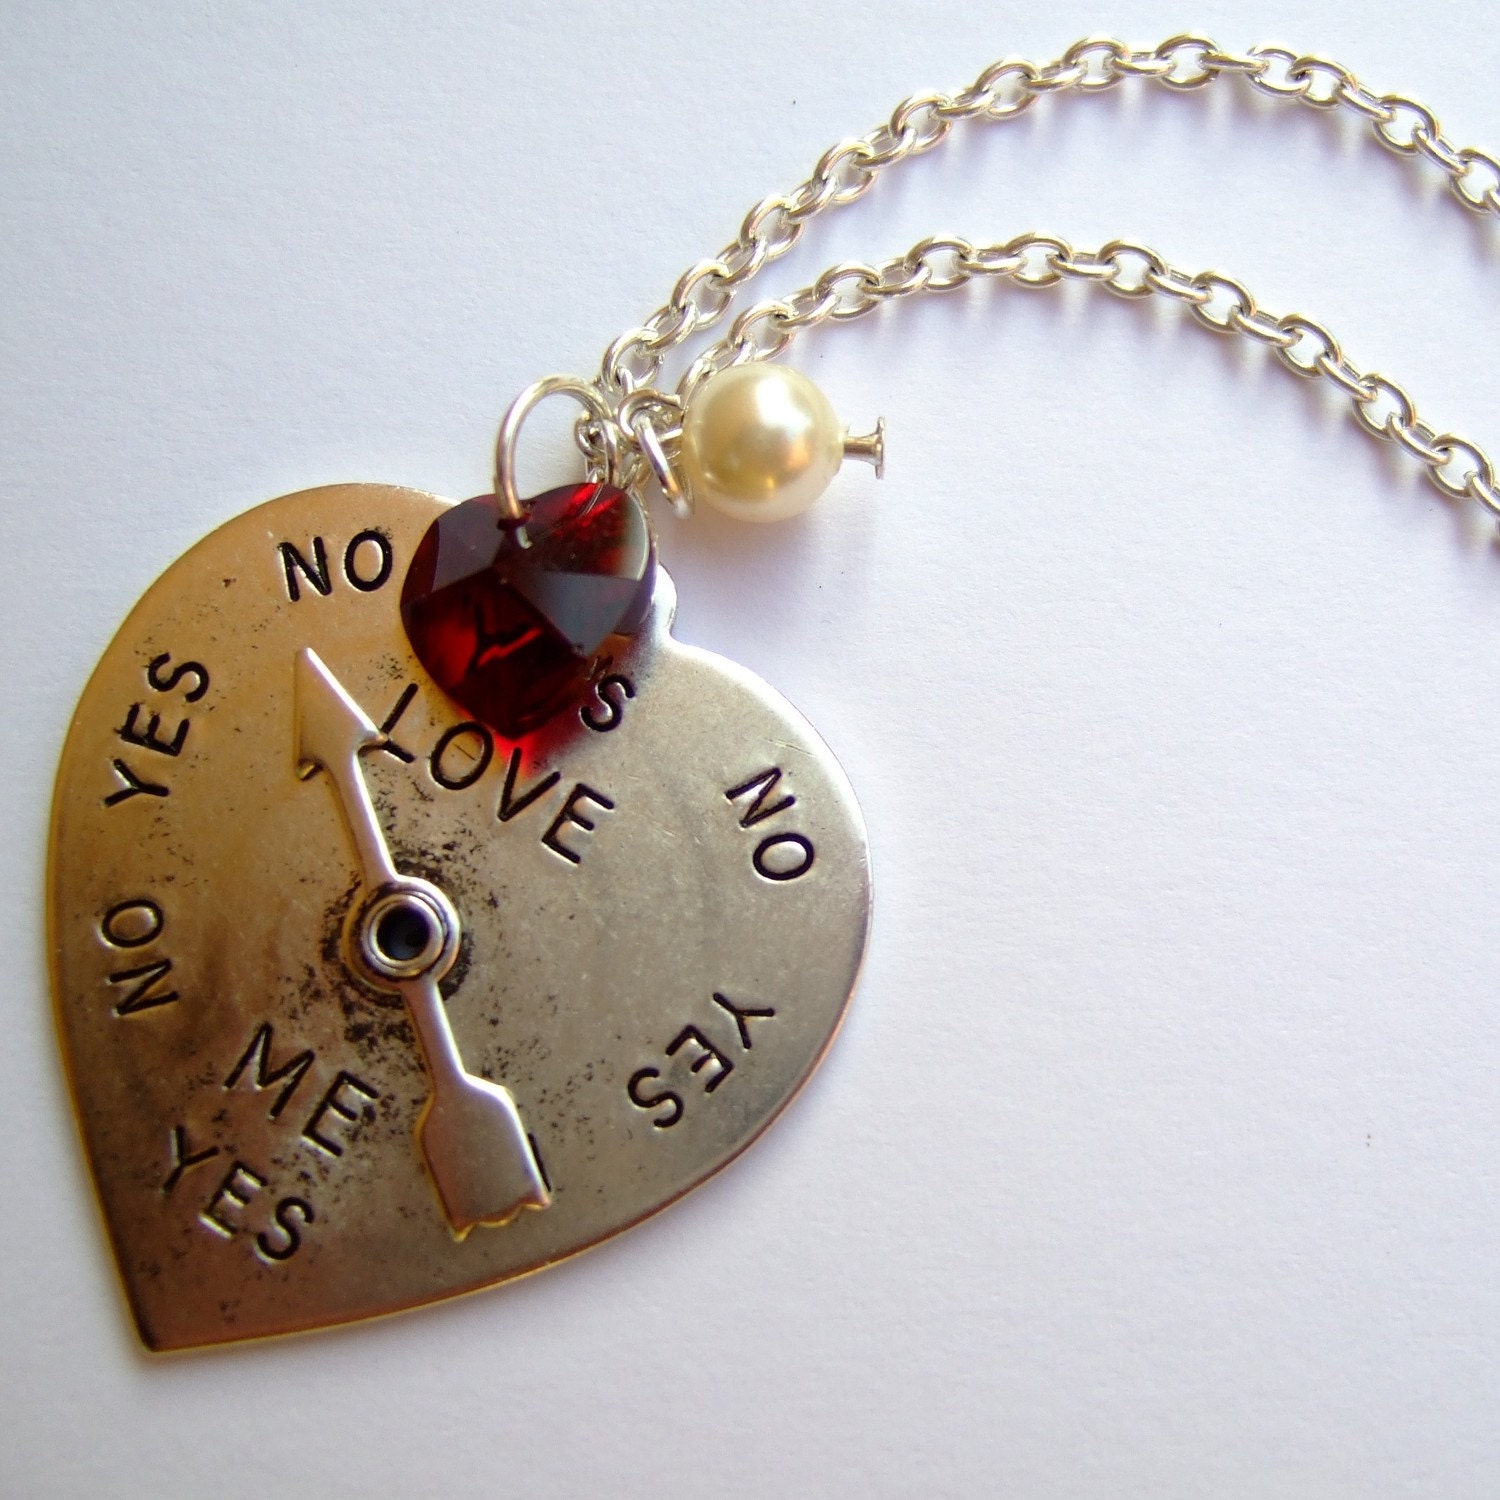 Heart spinner necklace with swarovski crystal and pearl - "He loves me, he loves me not"